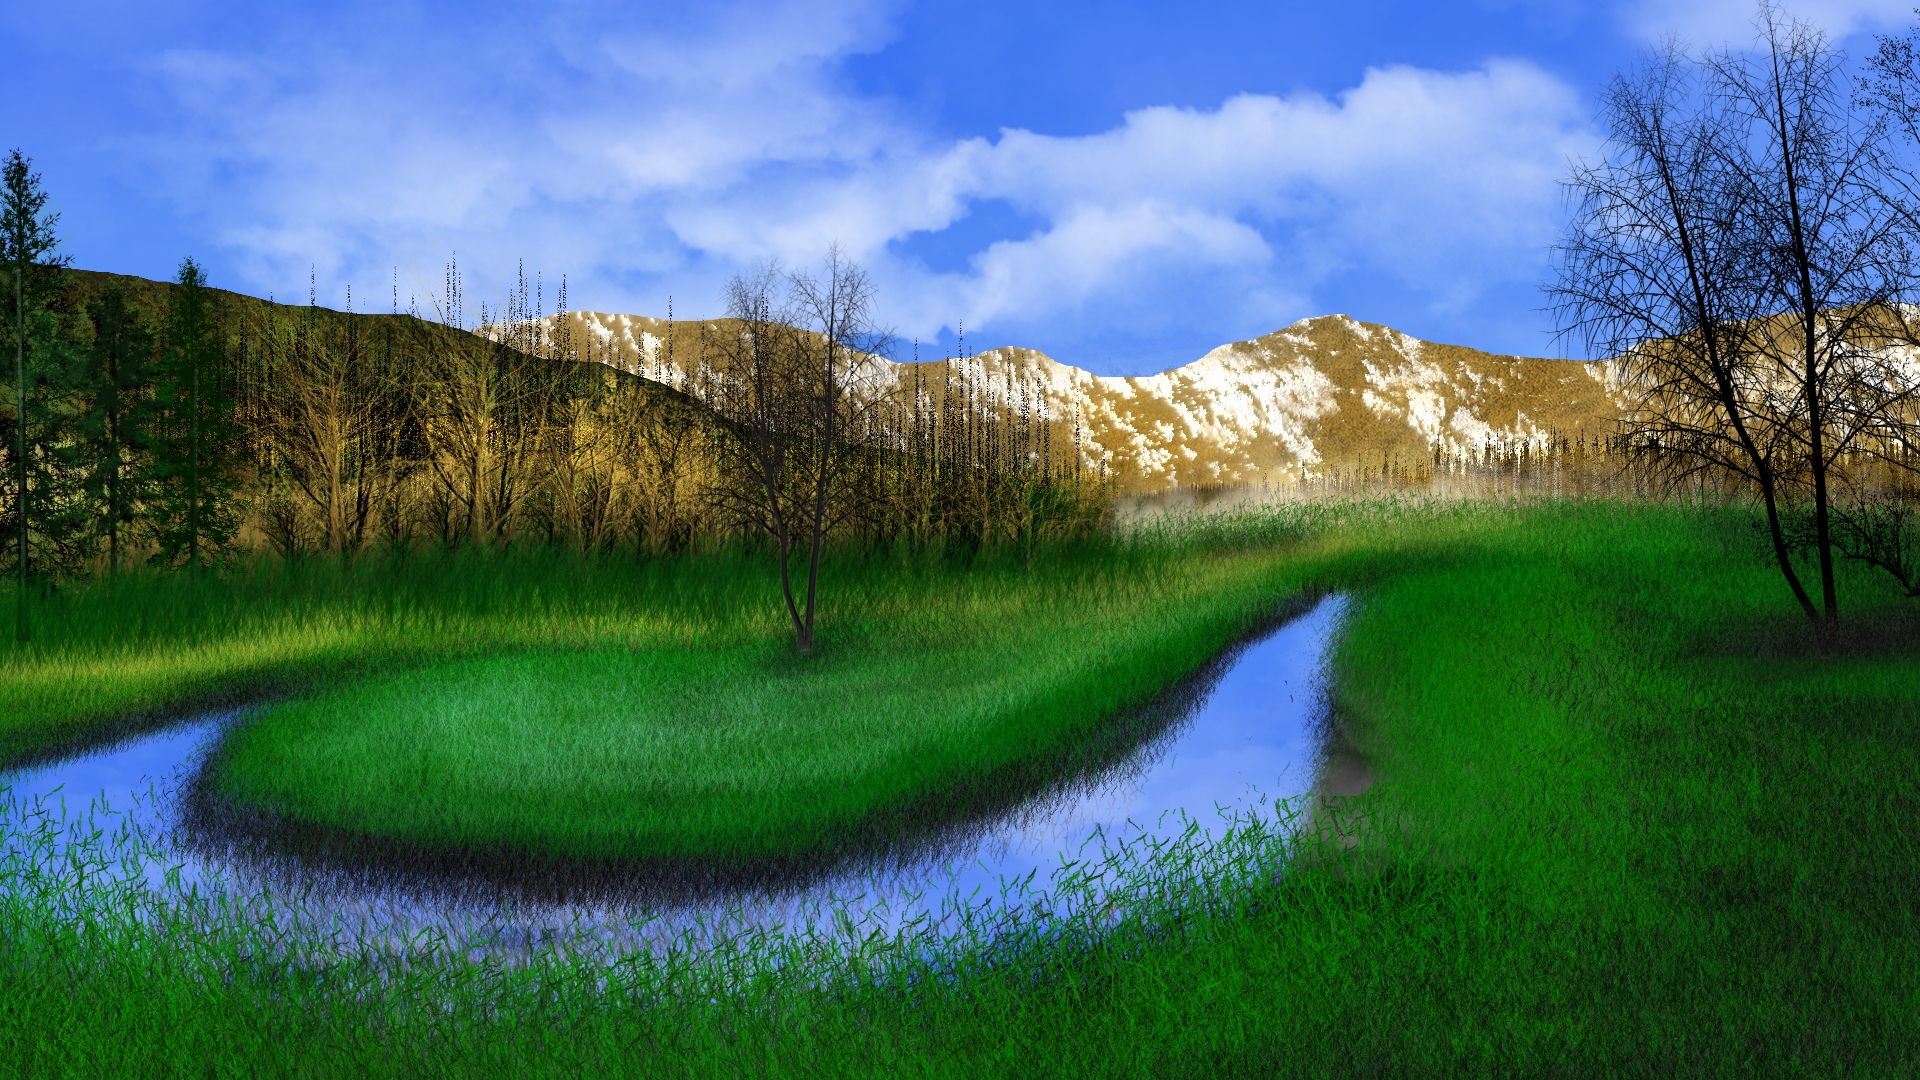 Digital Painting Digital Art Nature Landscape Creeks Water Clouds Sky Mountains Trees 1920x1080